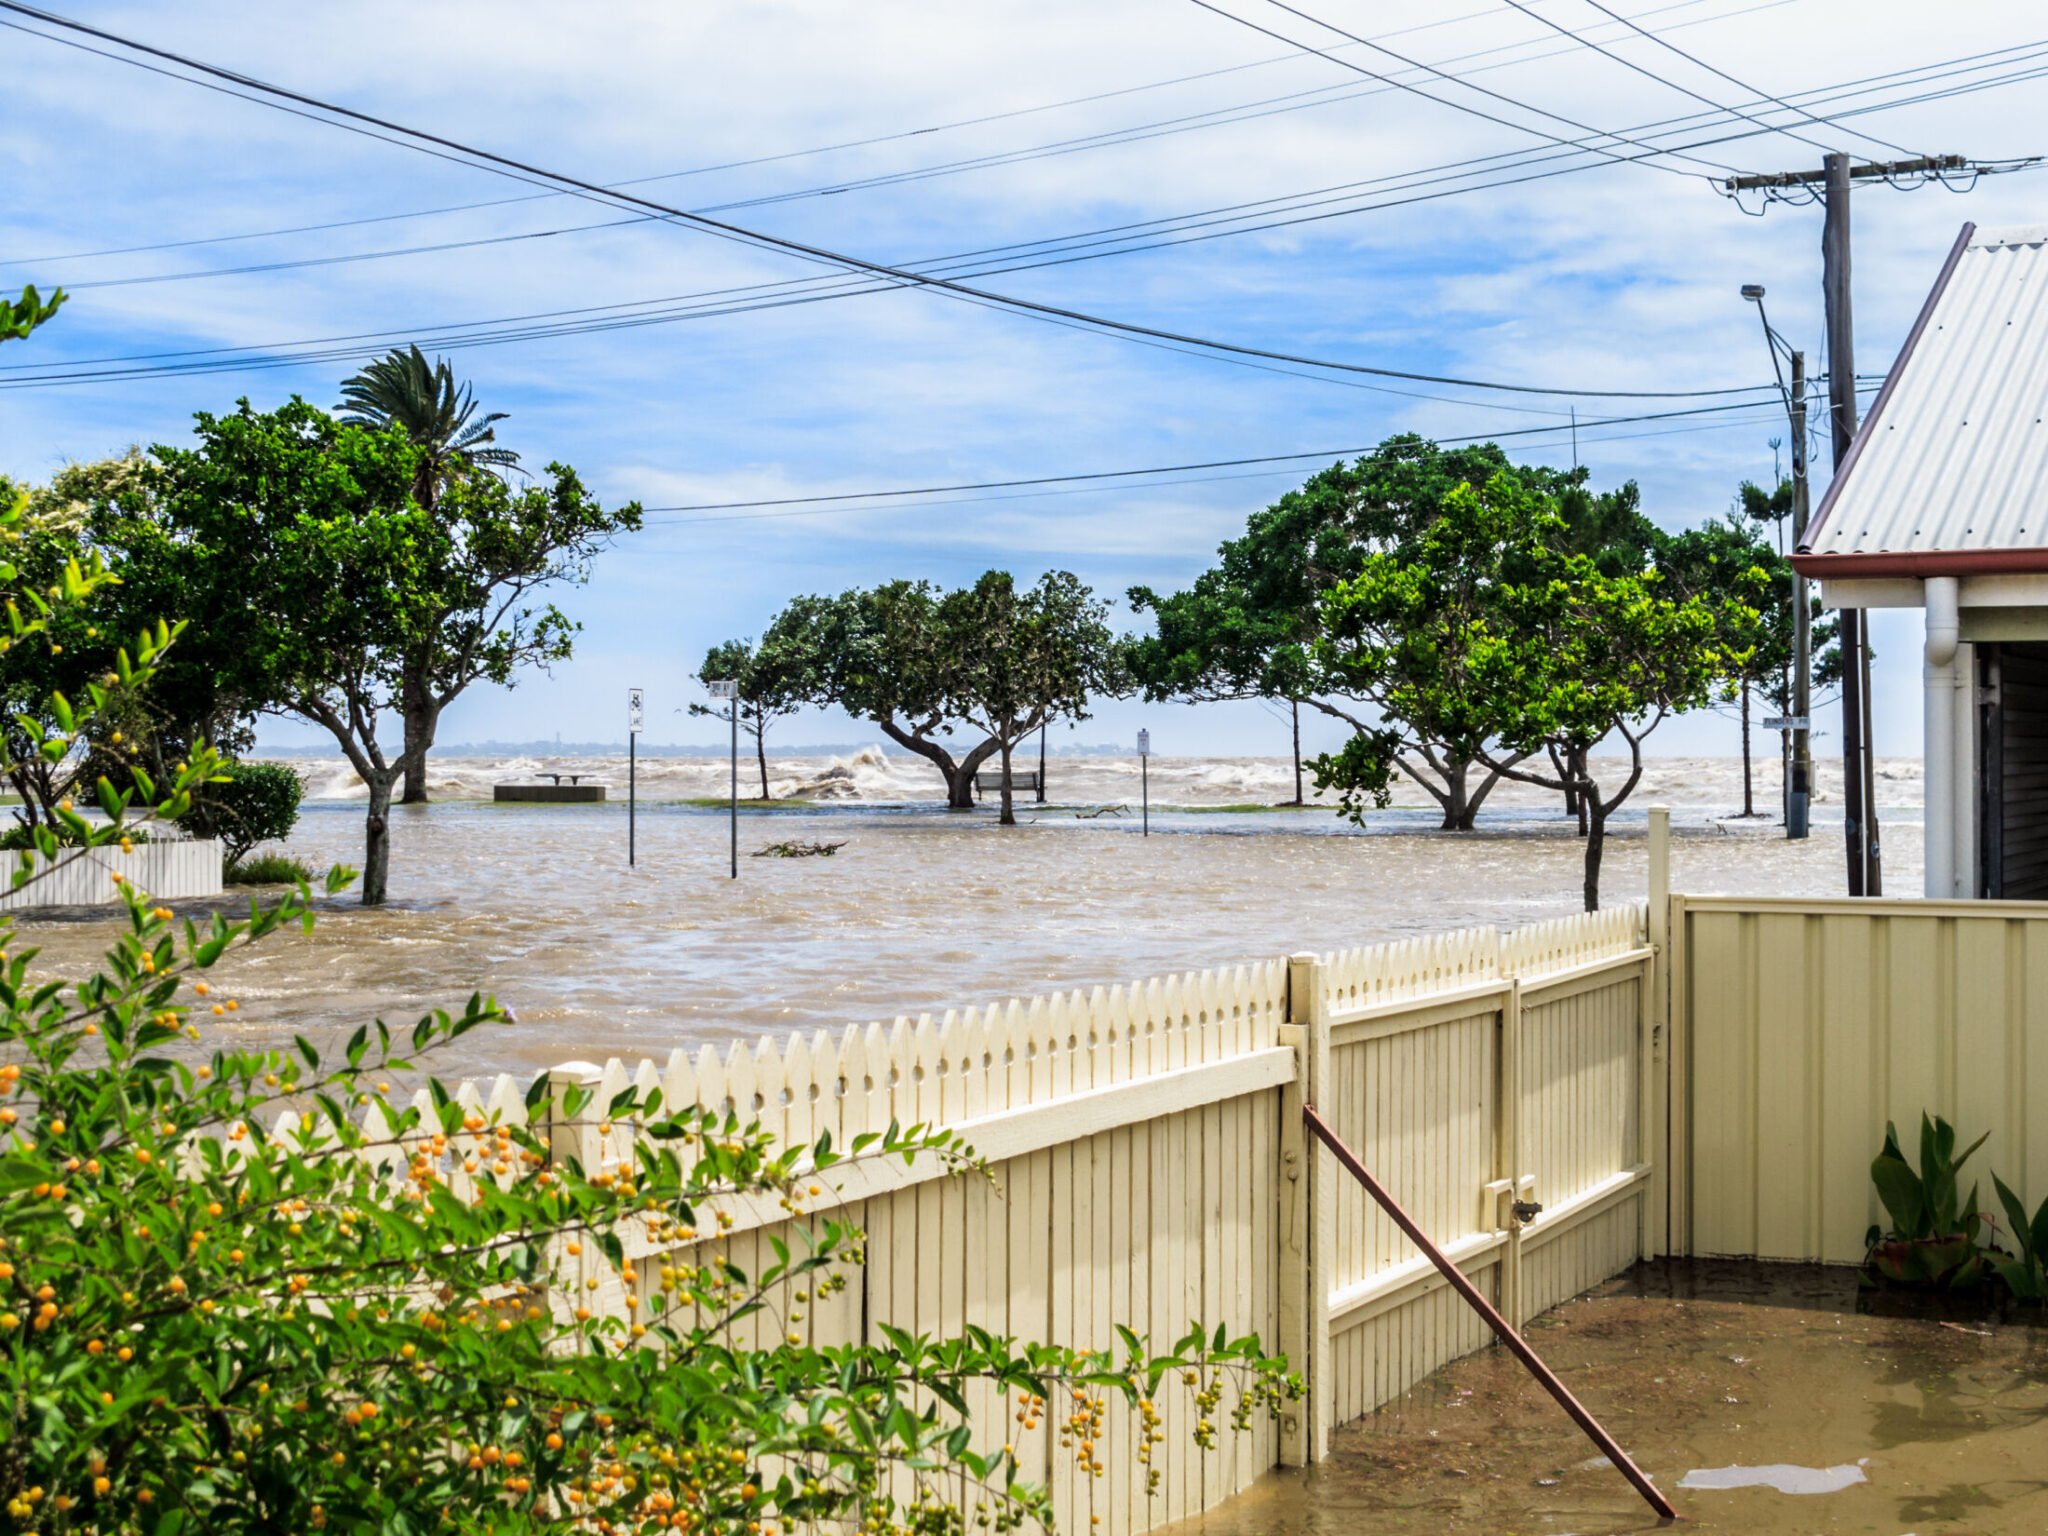 The sea washing over the sea wall and flooding the street in Sandgate, Brisbane